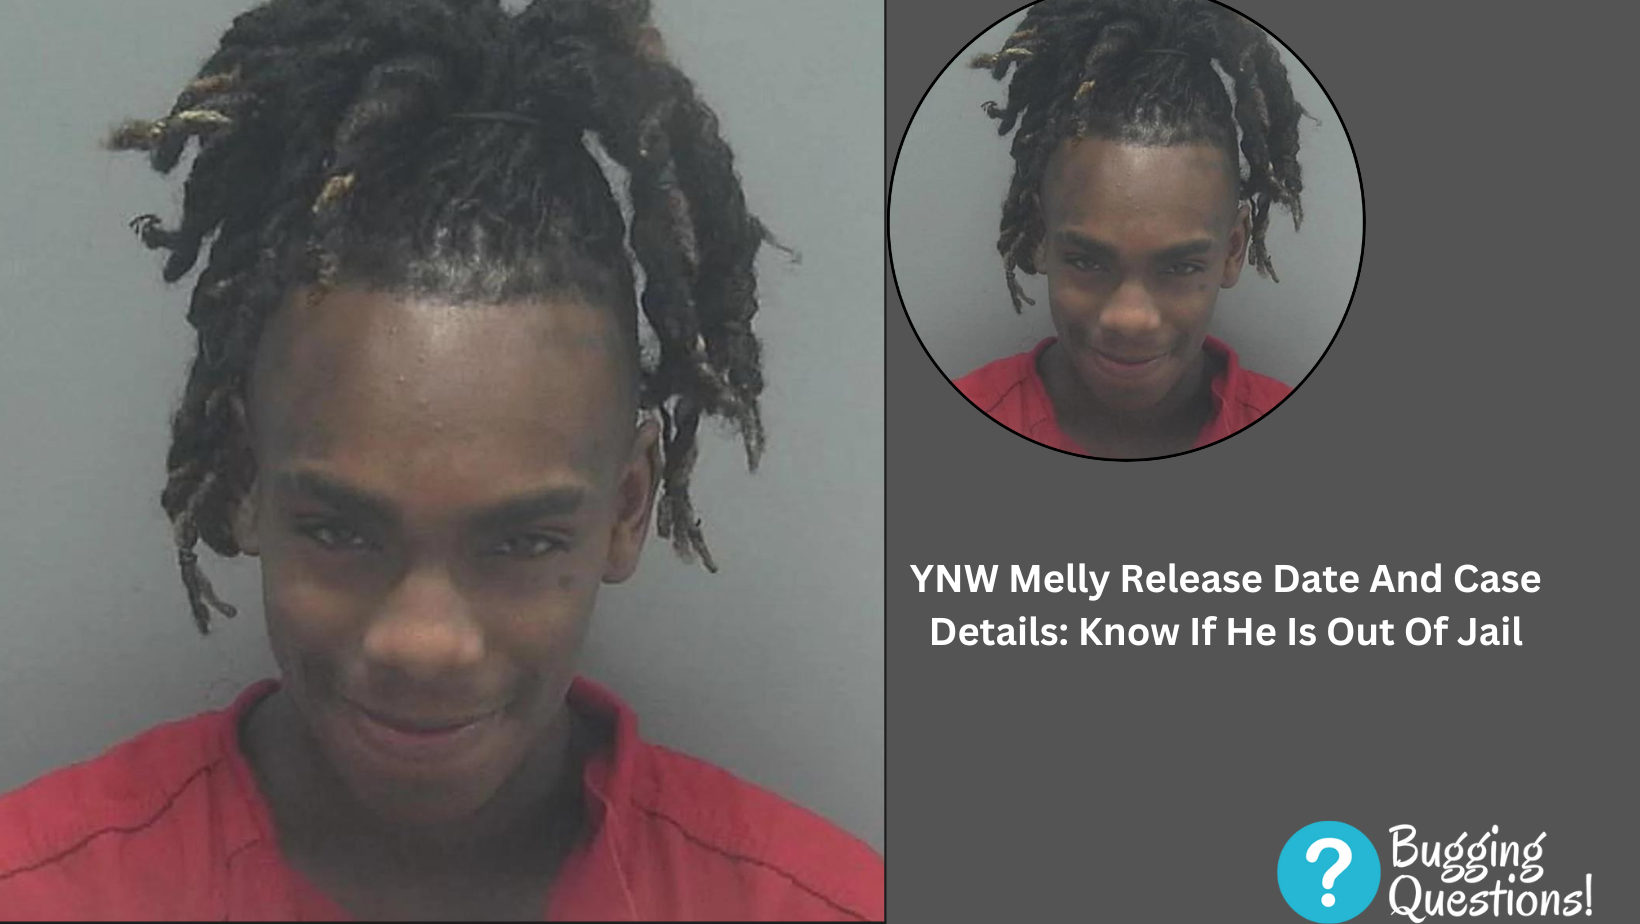 YNW Melly Release Date And Case Details